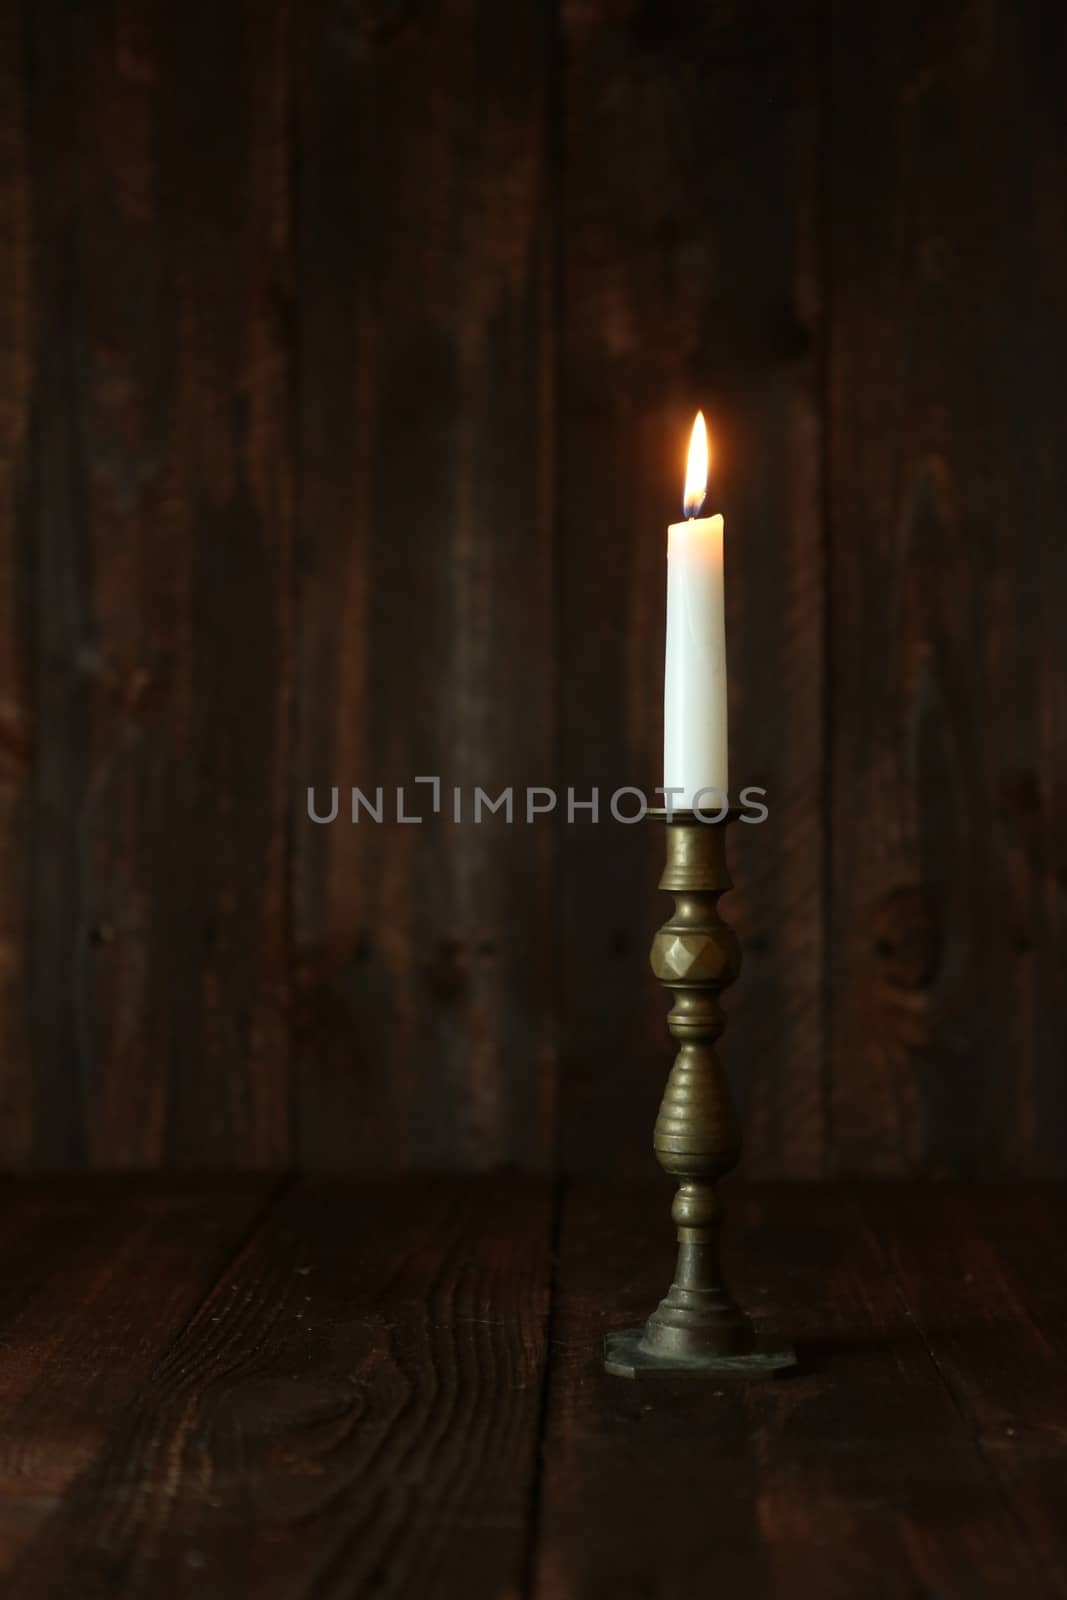 Candle on an Old Wooden Rustic Background